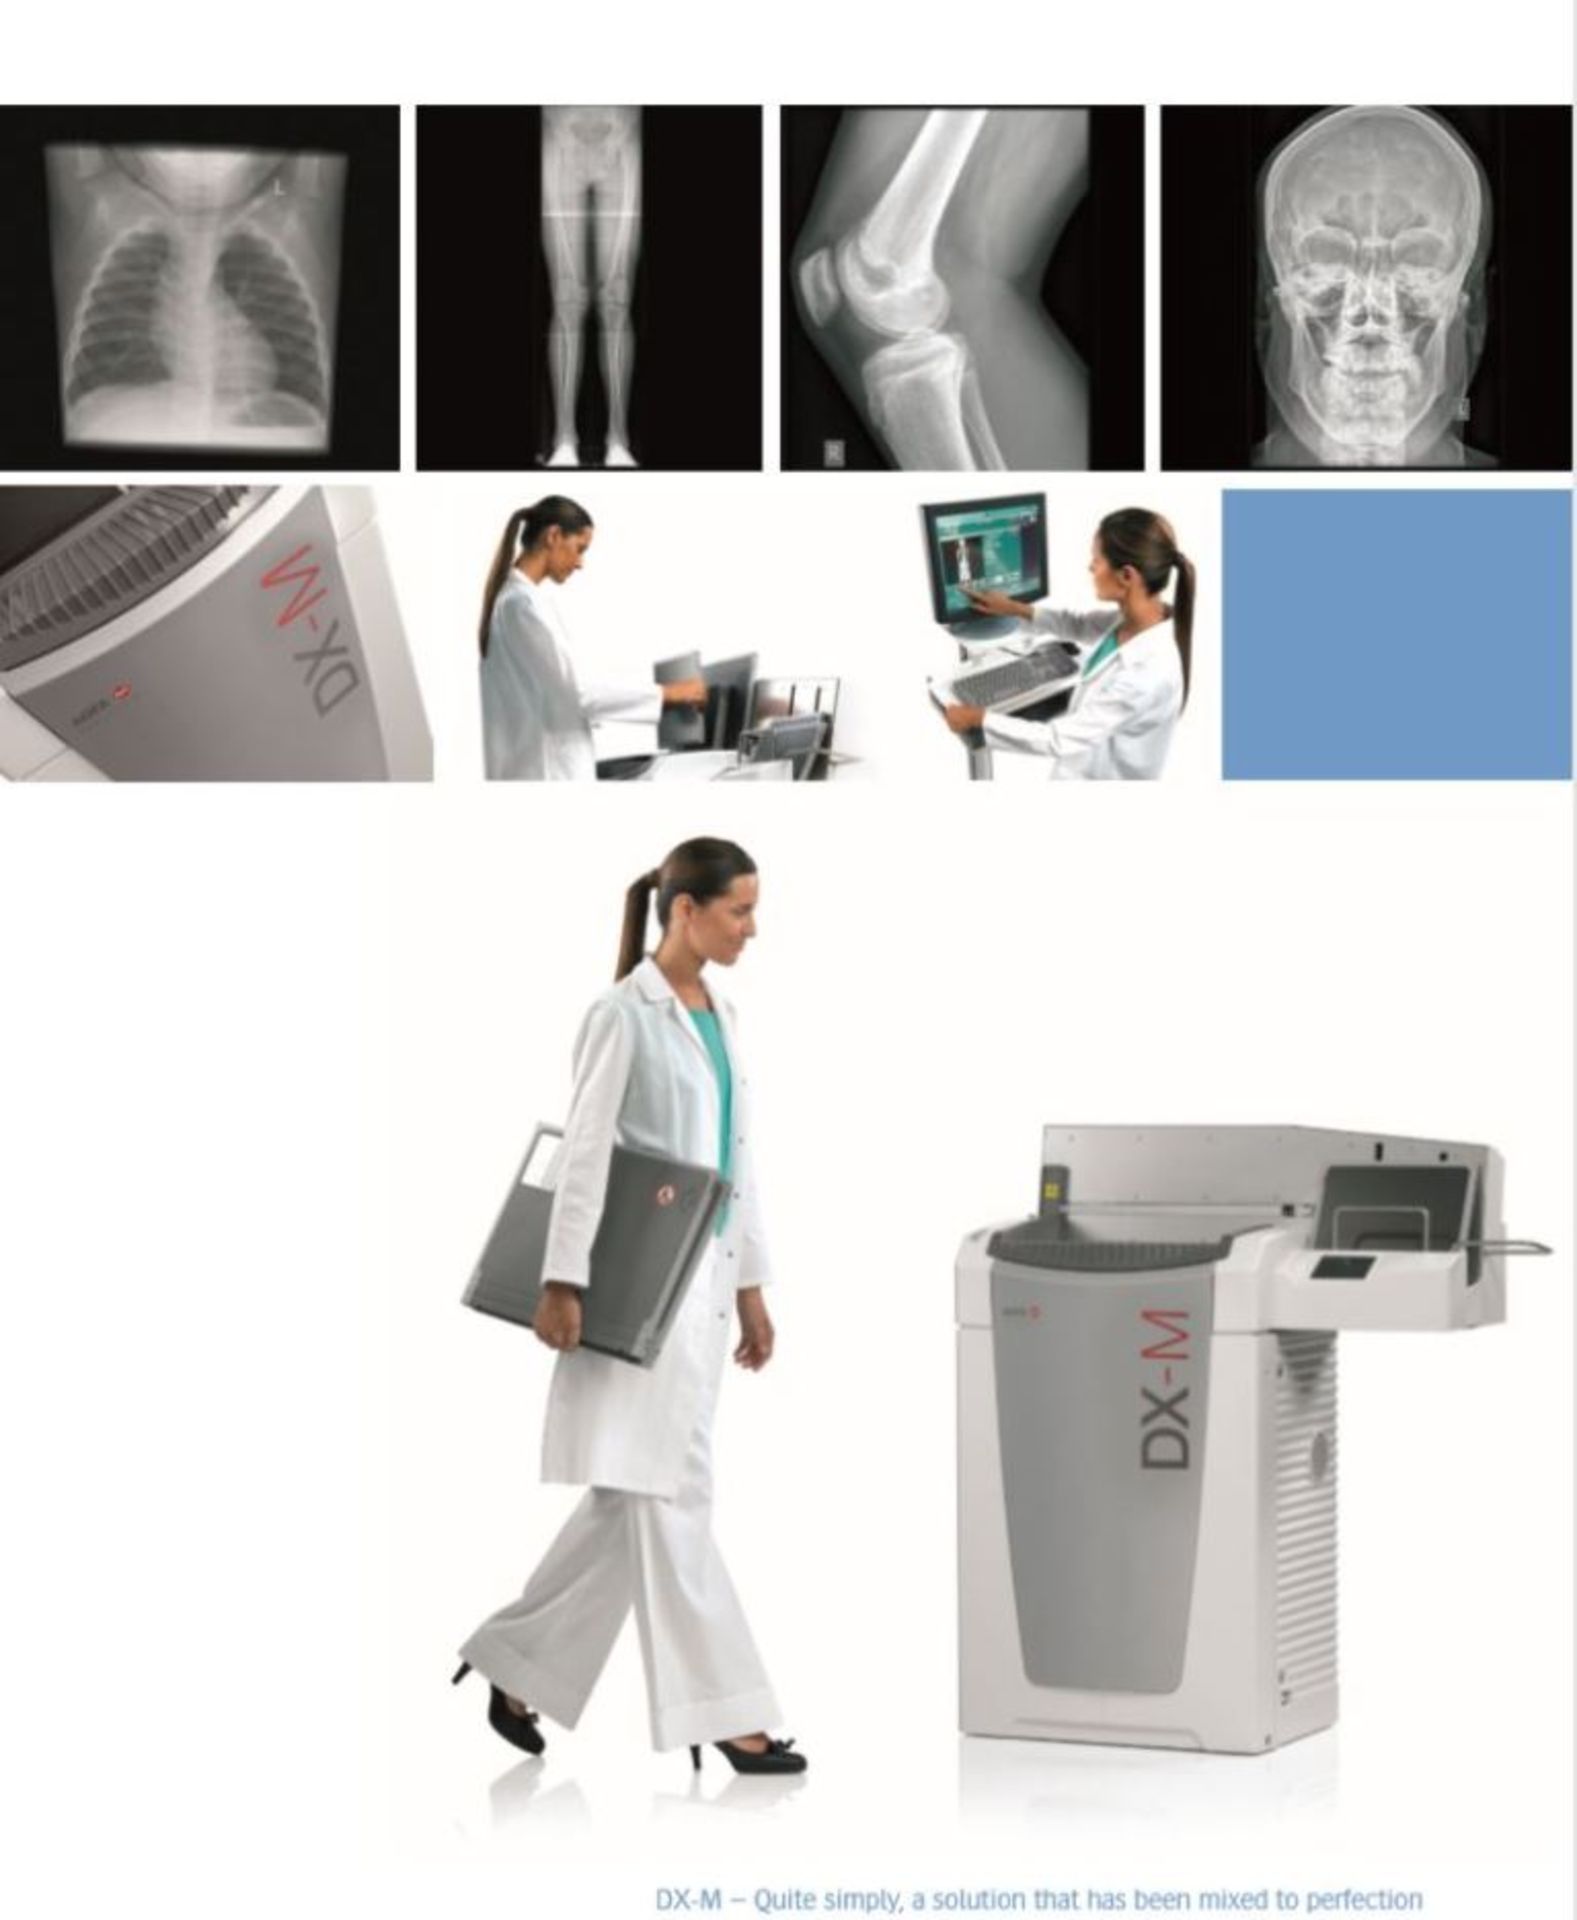 LOCATED AT MELTHAM - Agfa HealthCarea s DX-M CR (Computed Radiography) solution with needl - Image 13 of 16